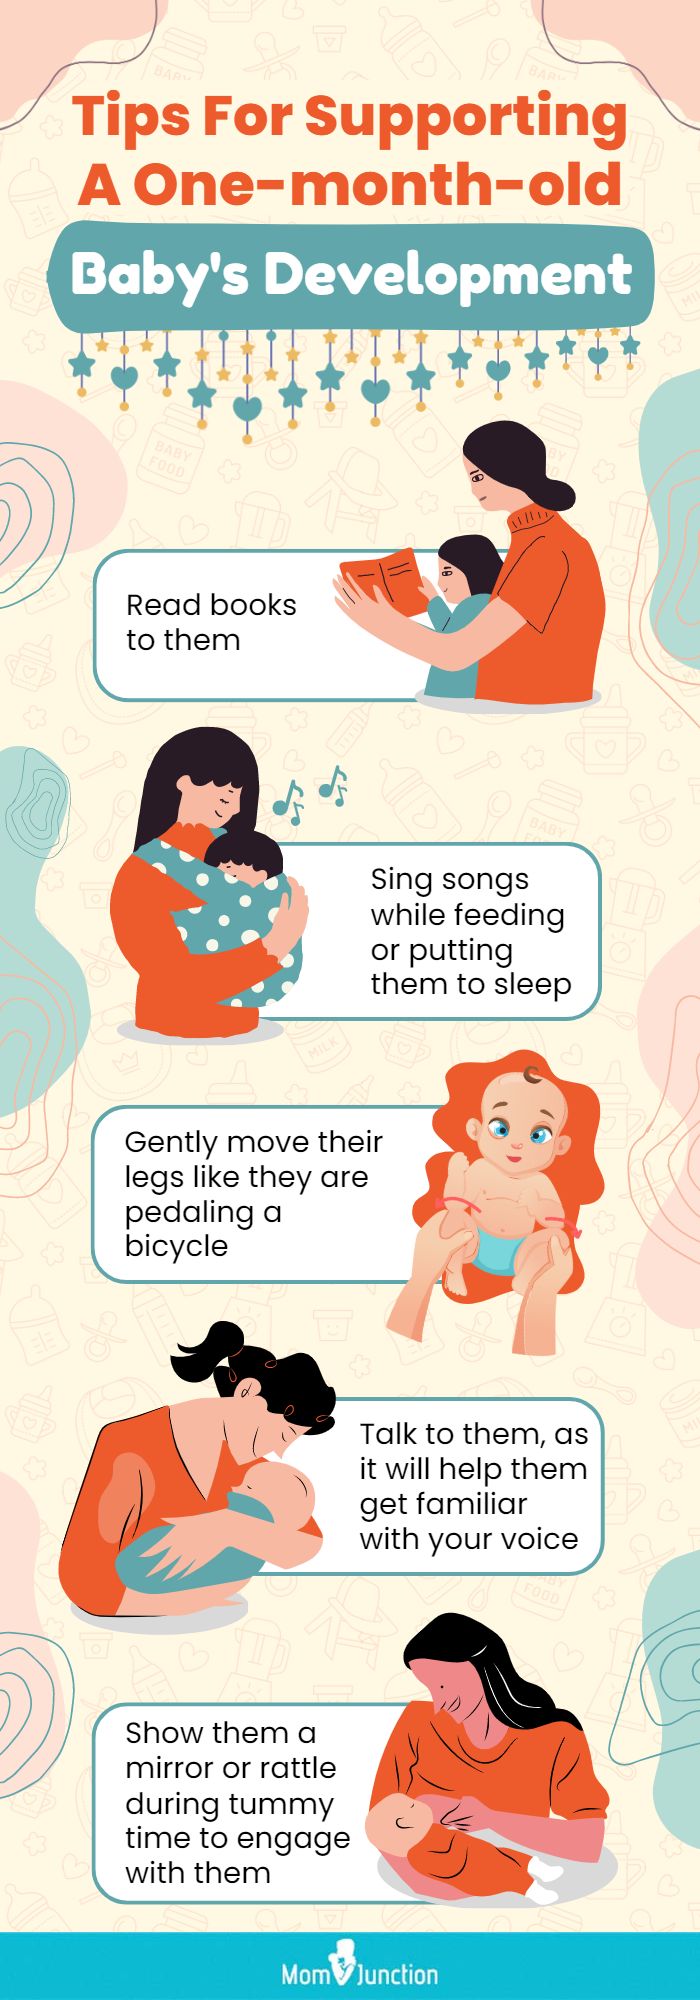 tips for supporting a one month old baby development (infographic)